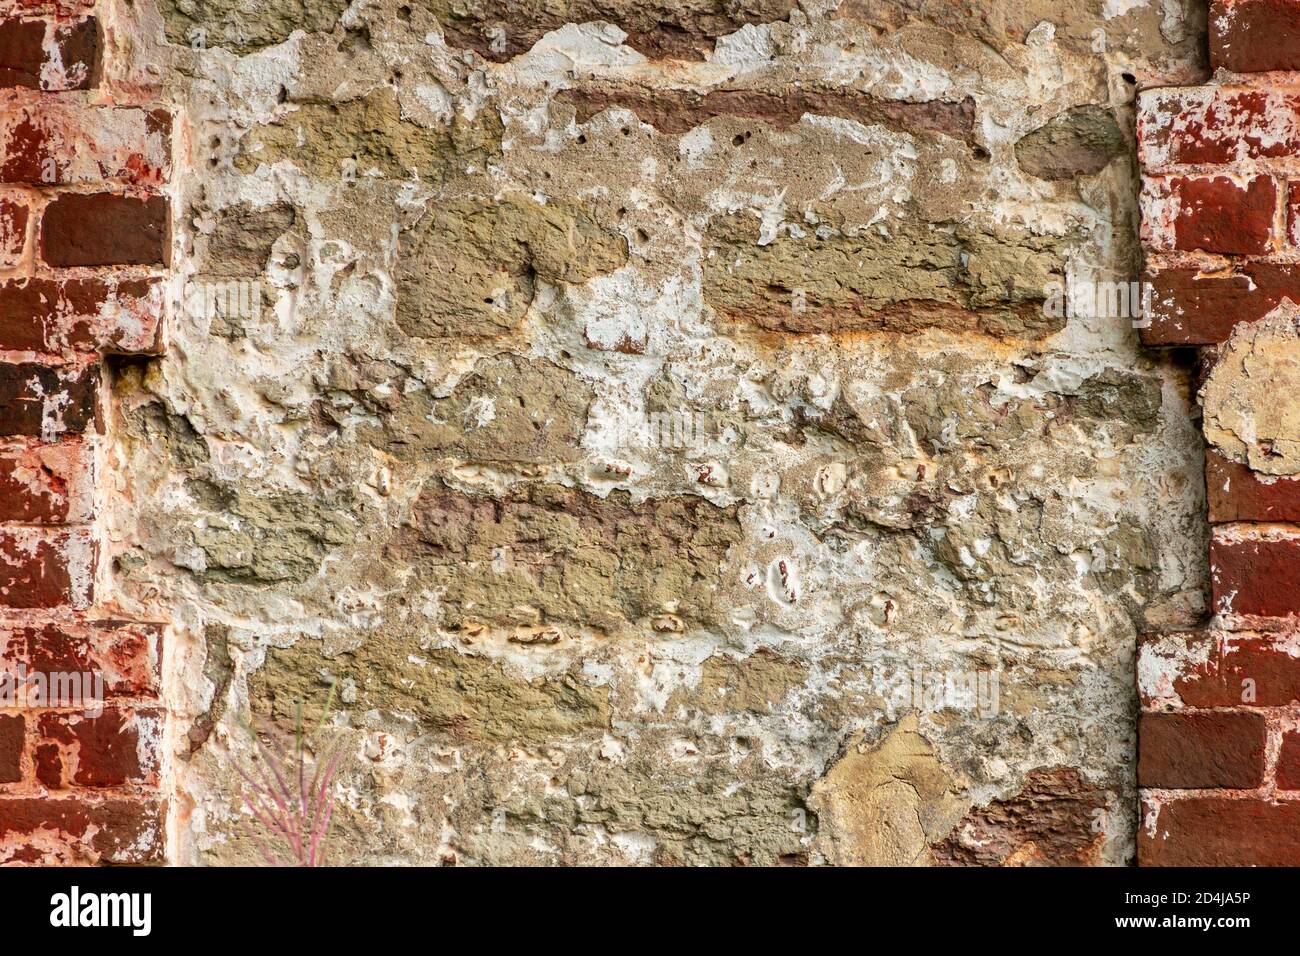 The surface of an old stone wall, masonry of uneven wild hewn stones. Stock Photo